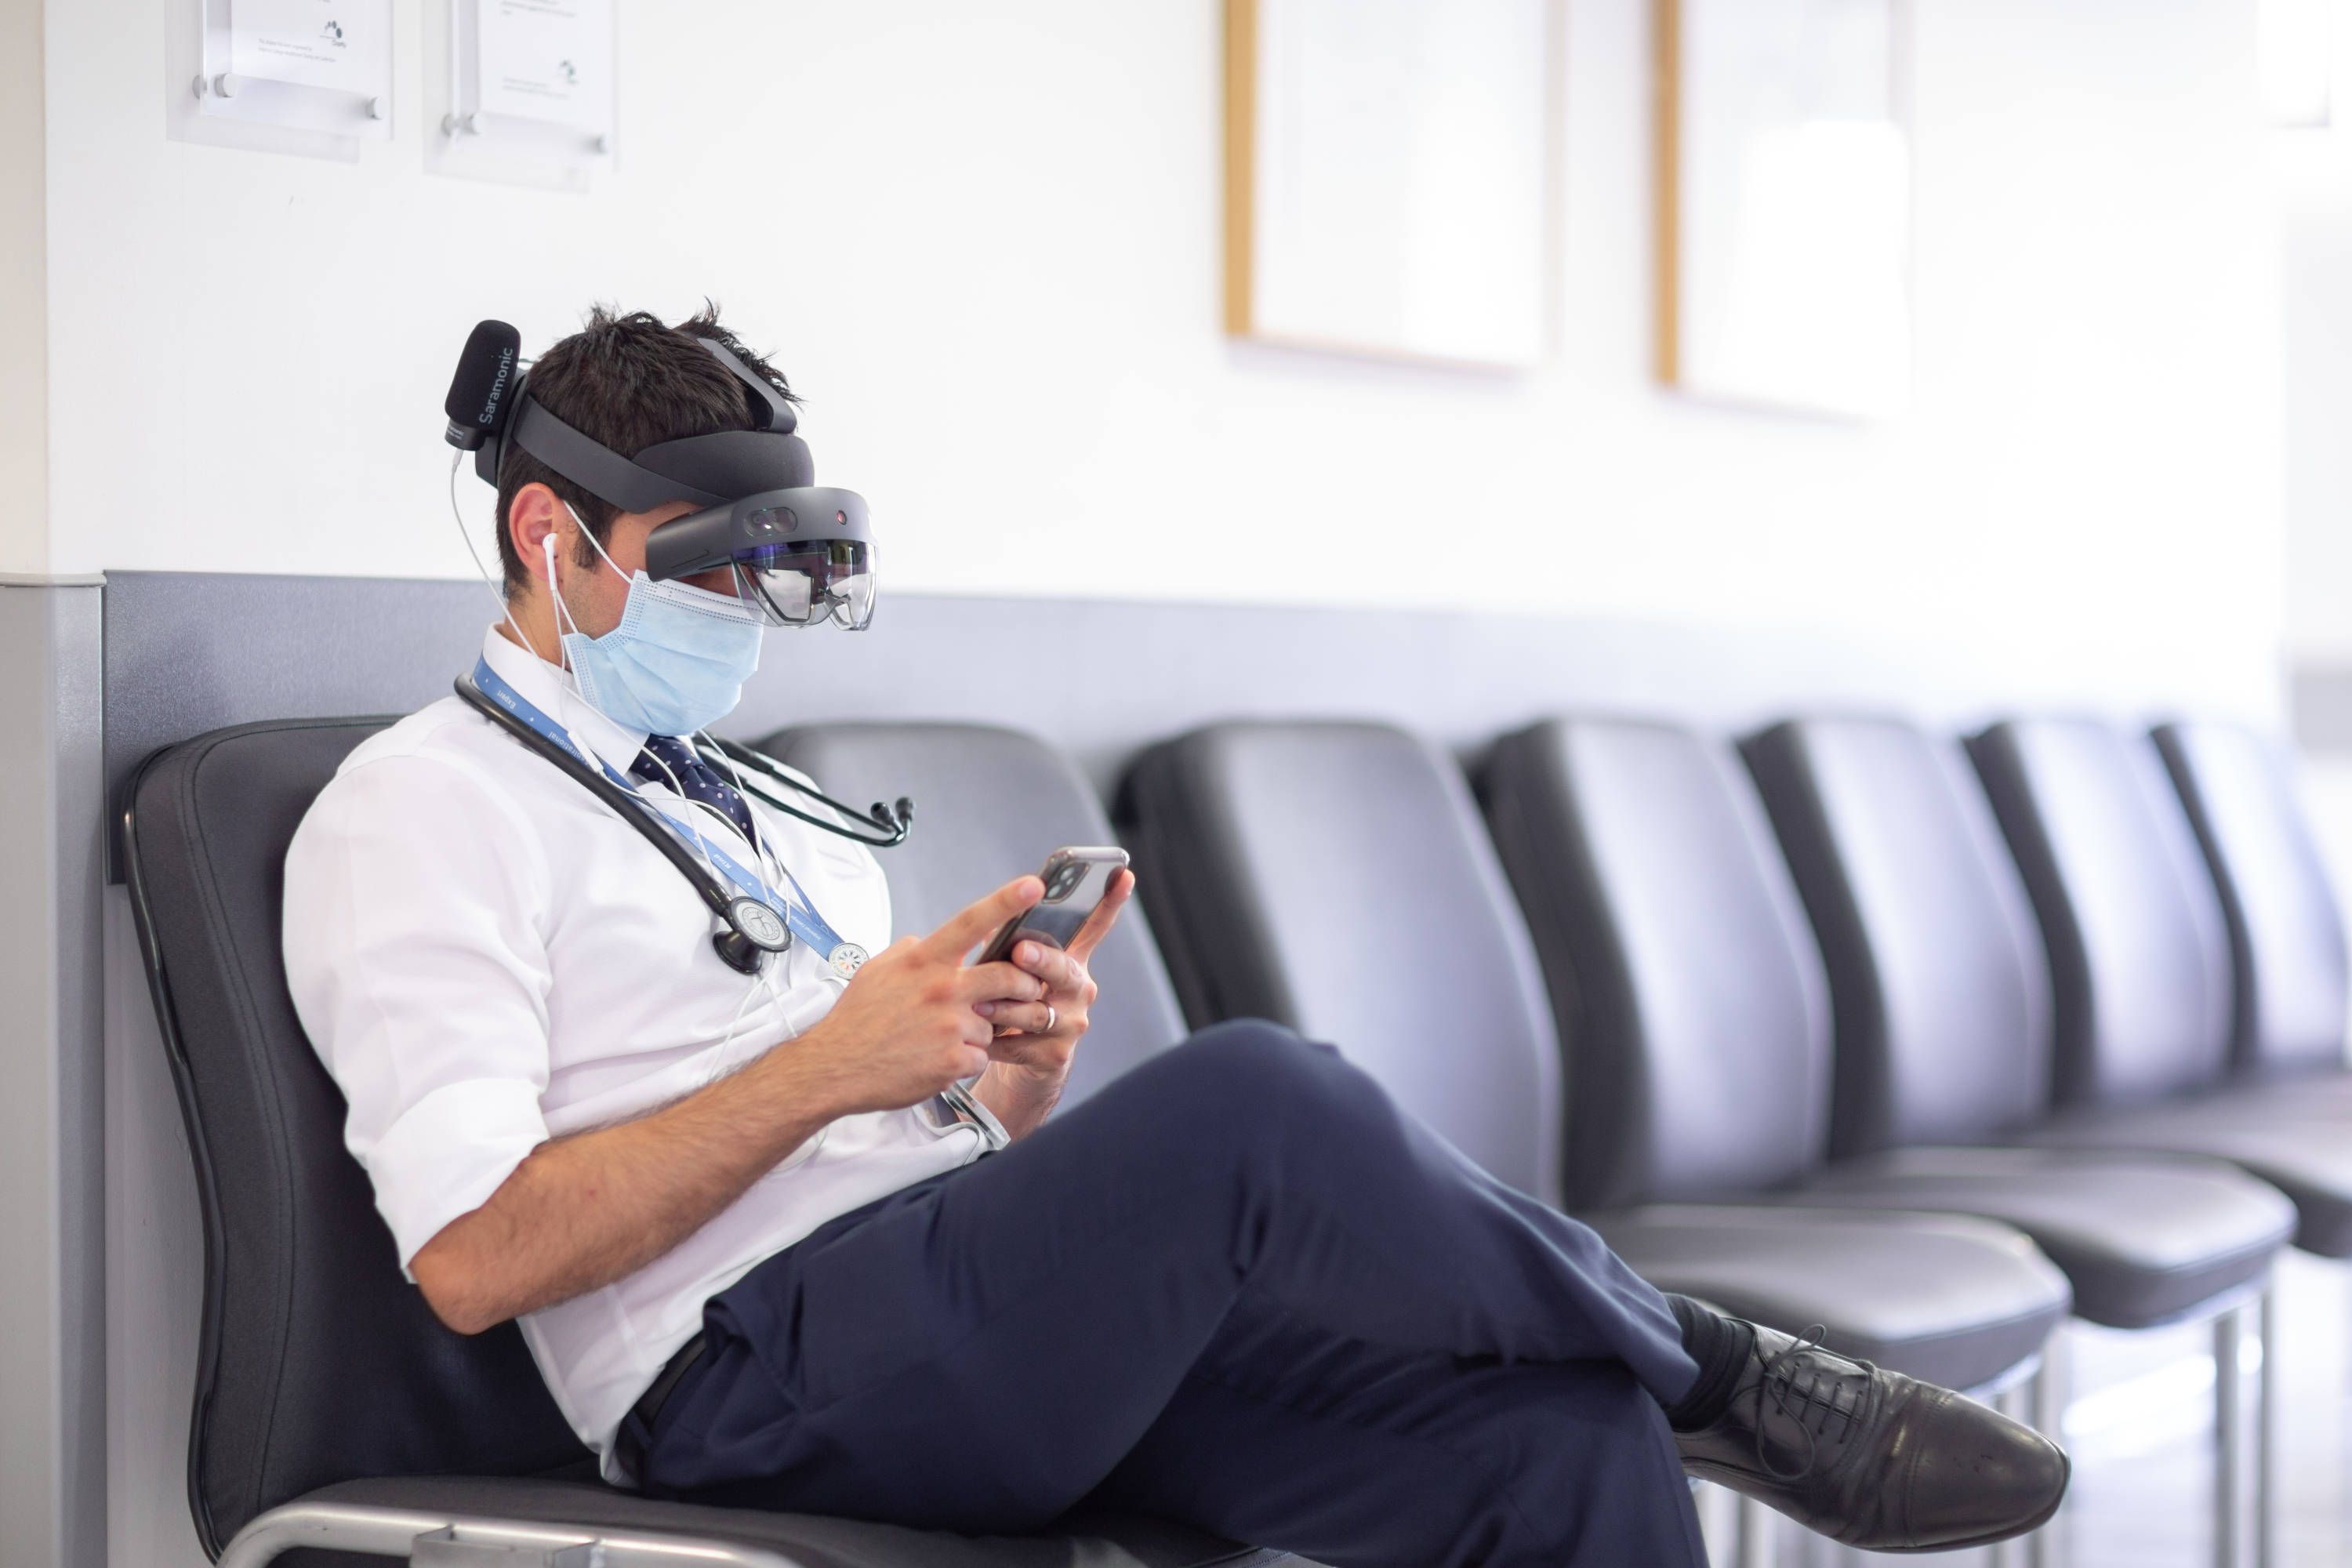 Member of staff working on phone using Microsoft Hololens